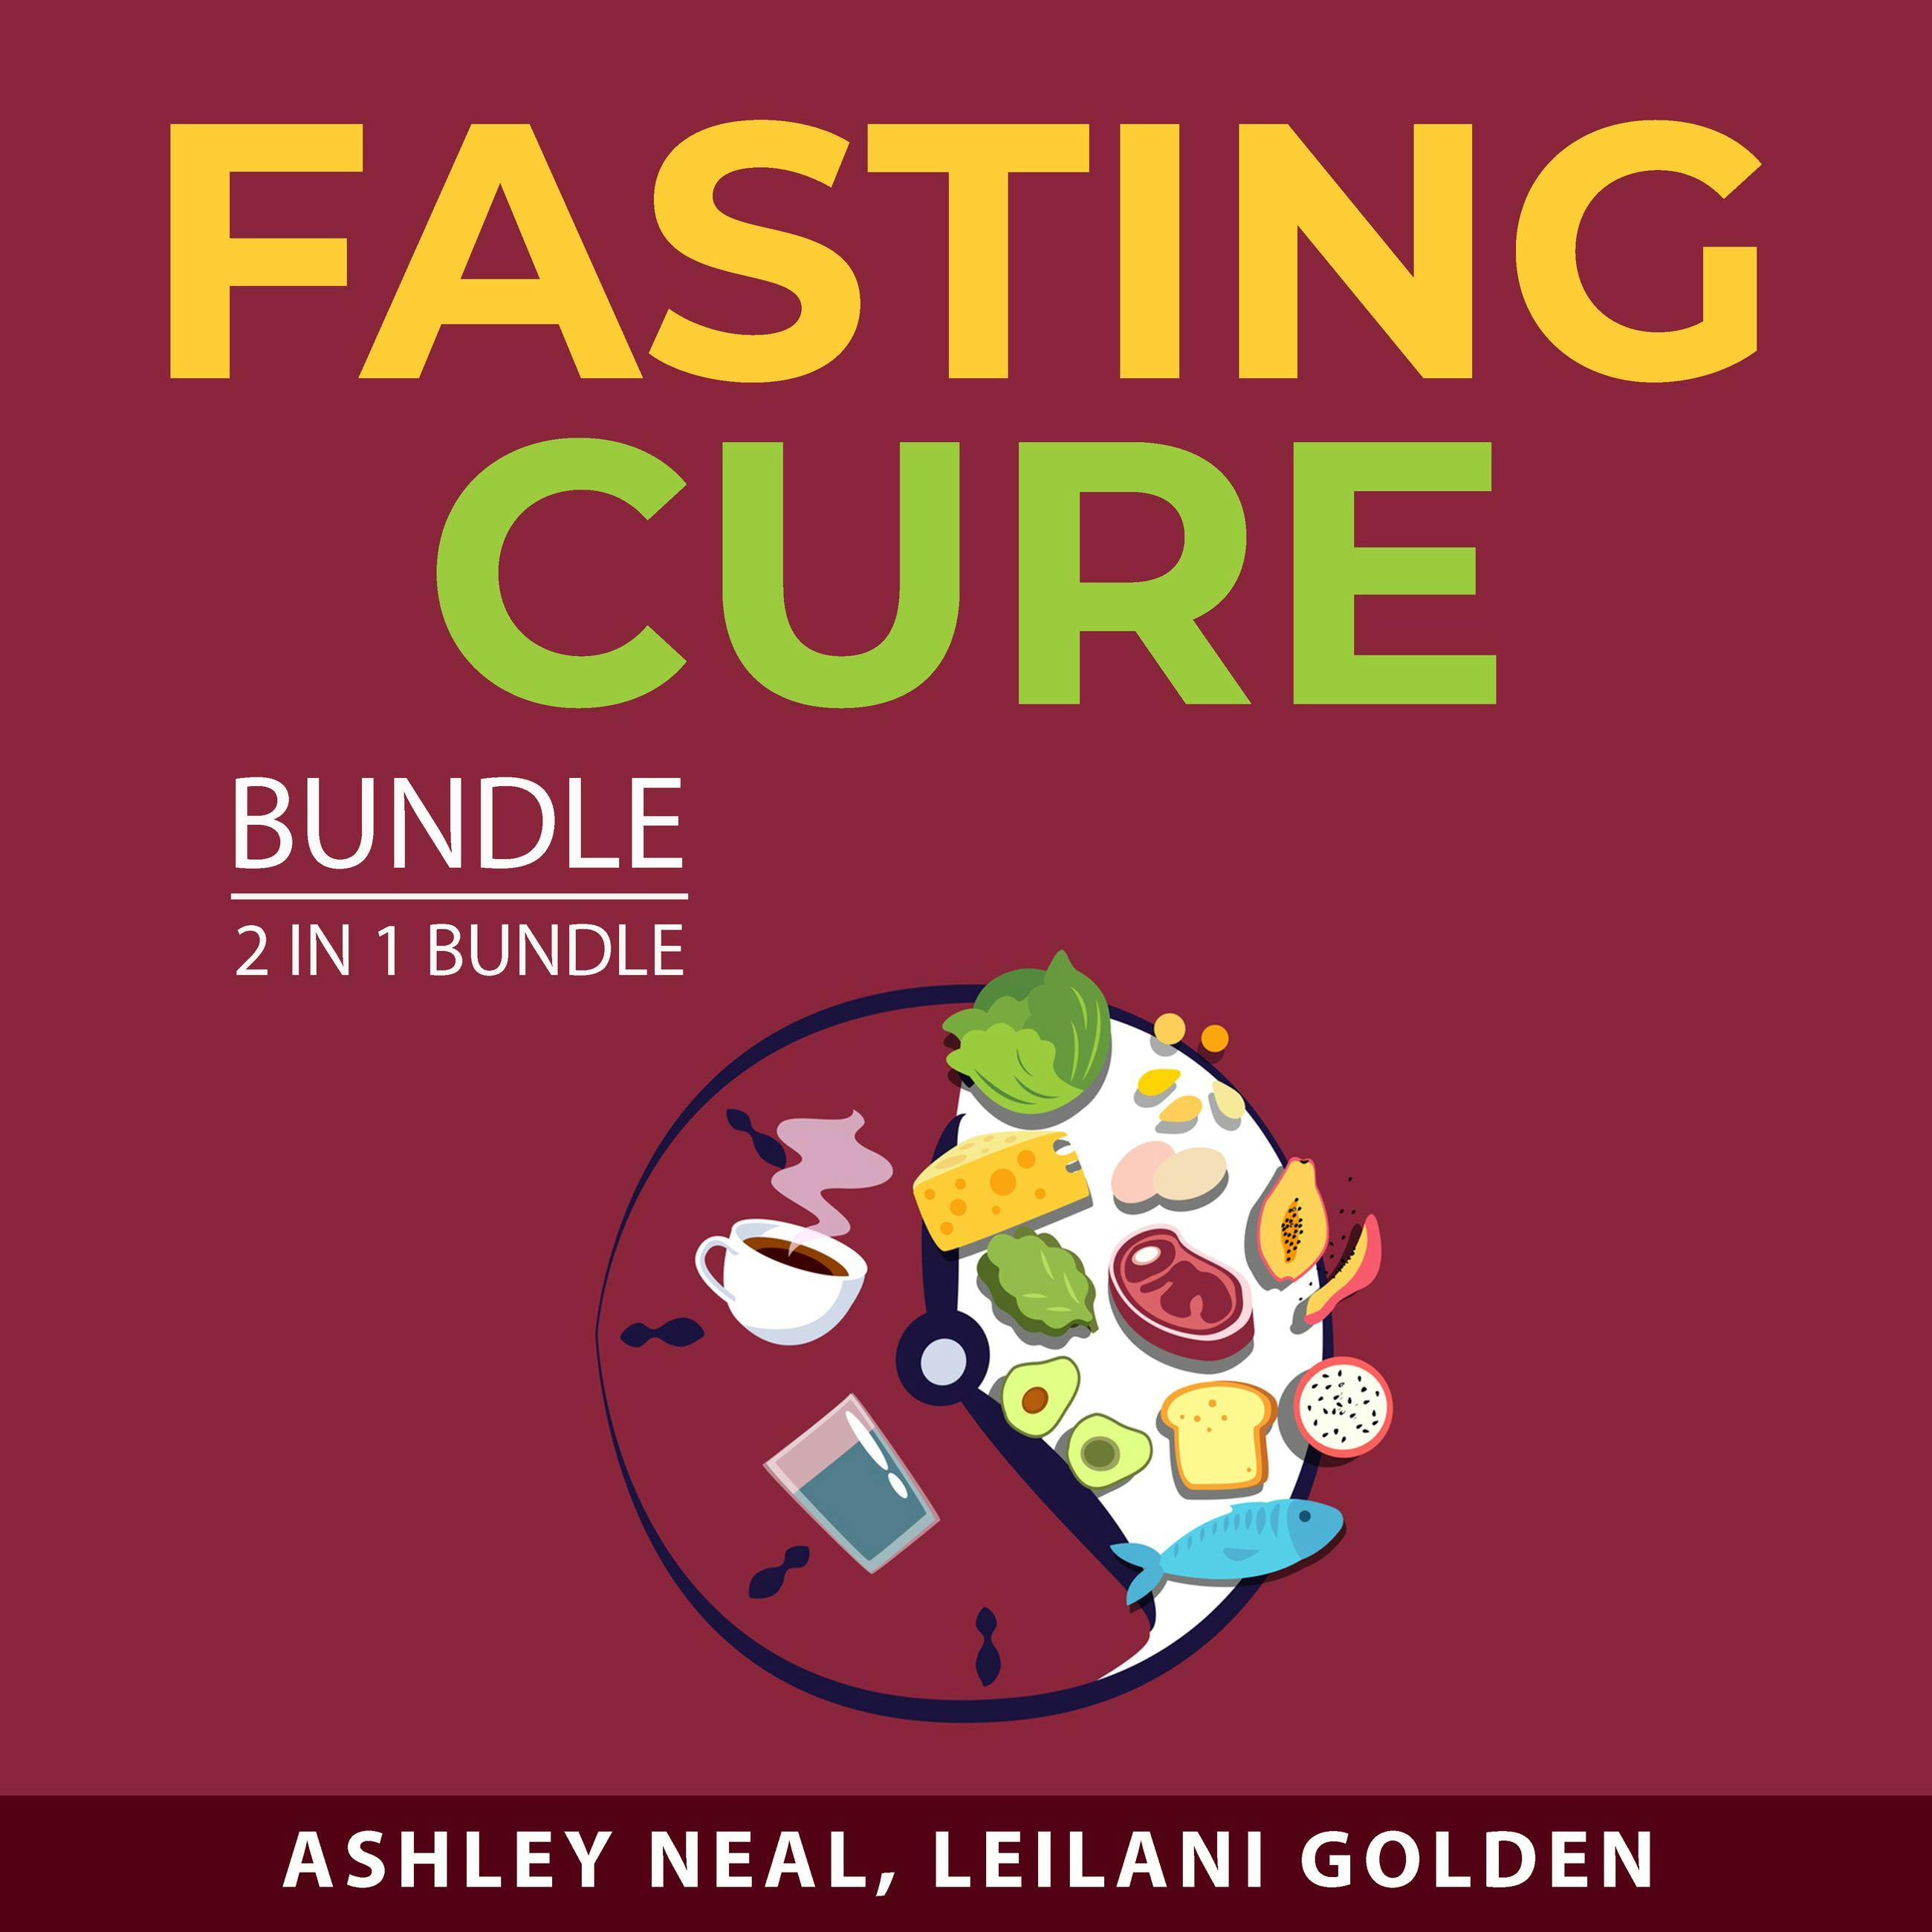 Fasting Cure Bundle, 2 in 1 Bundle: Everything About Intermittent Fasting and Fasting Diet For Weight Loss - Ashley Neal, Leilani Golden